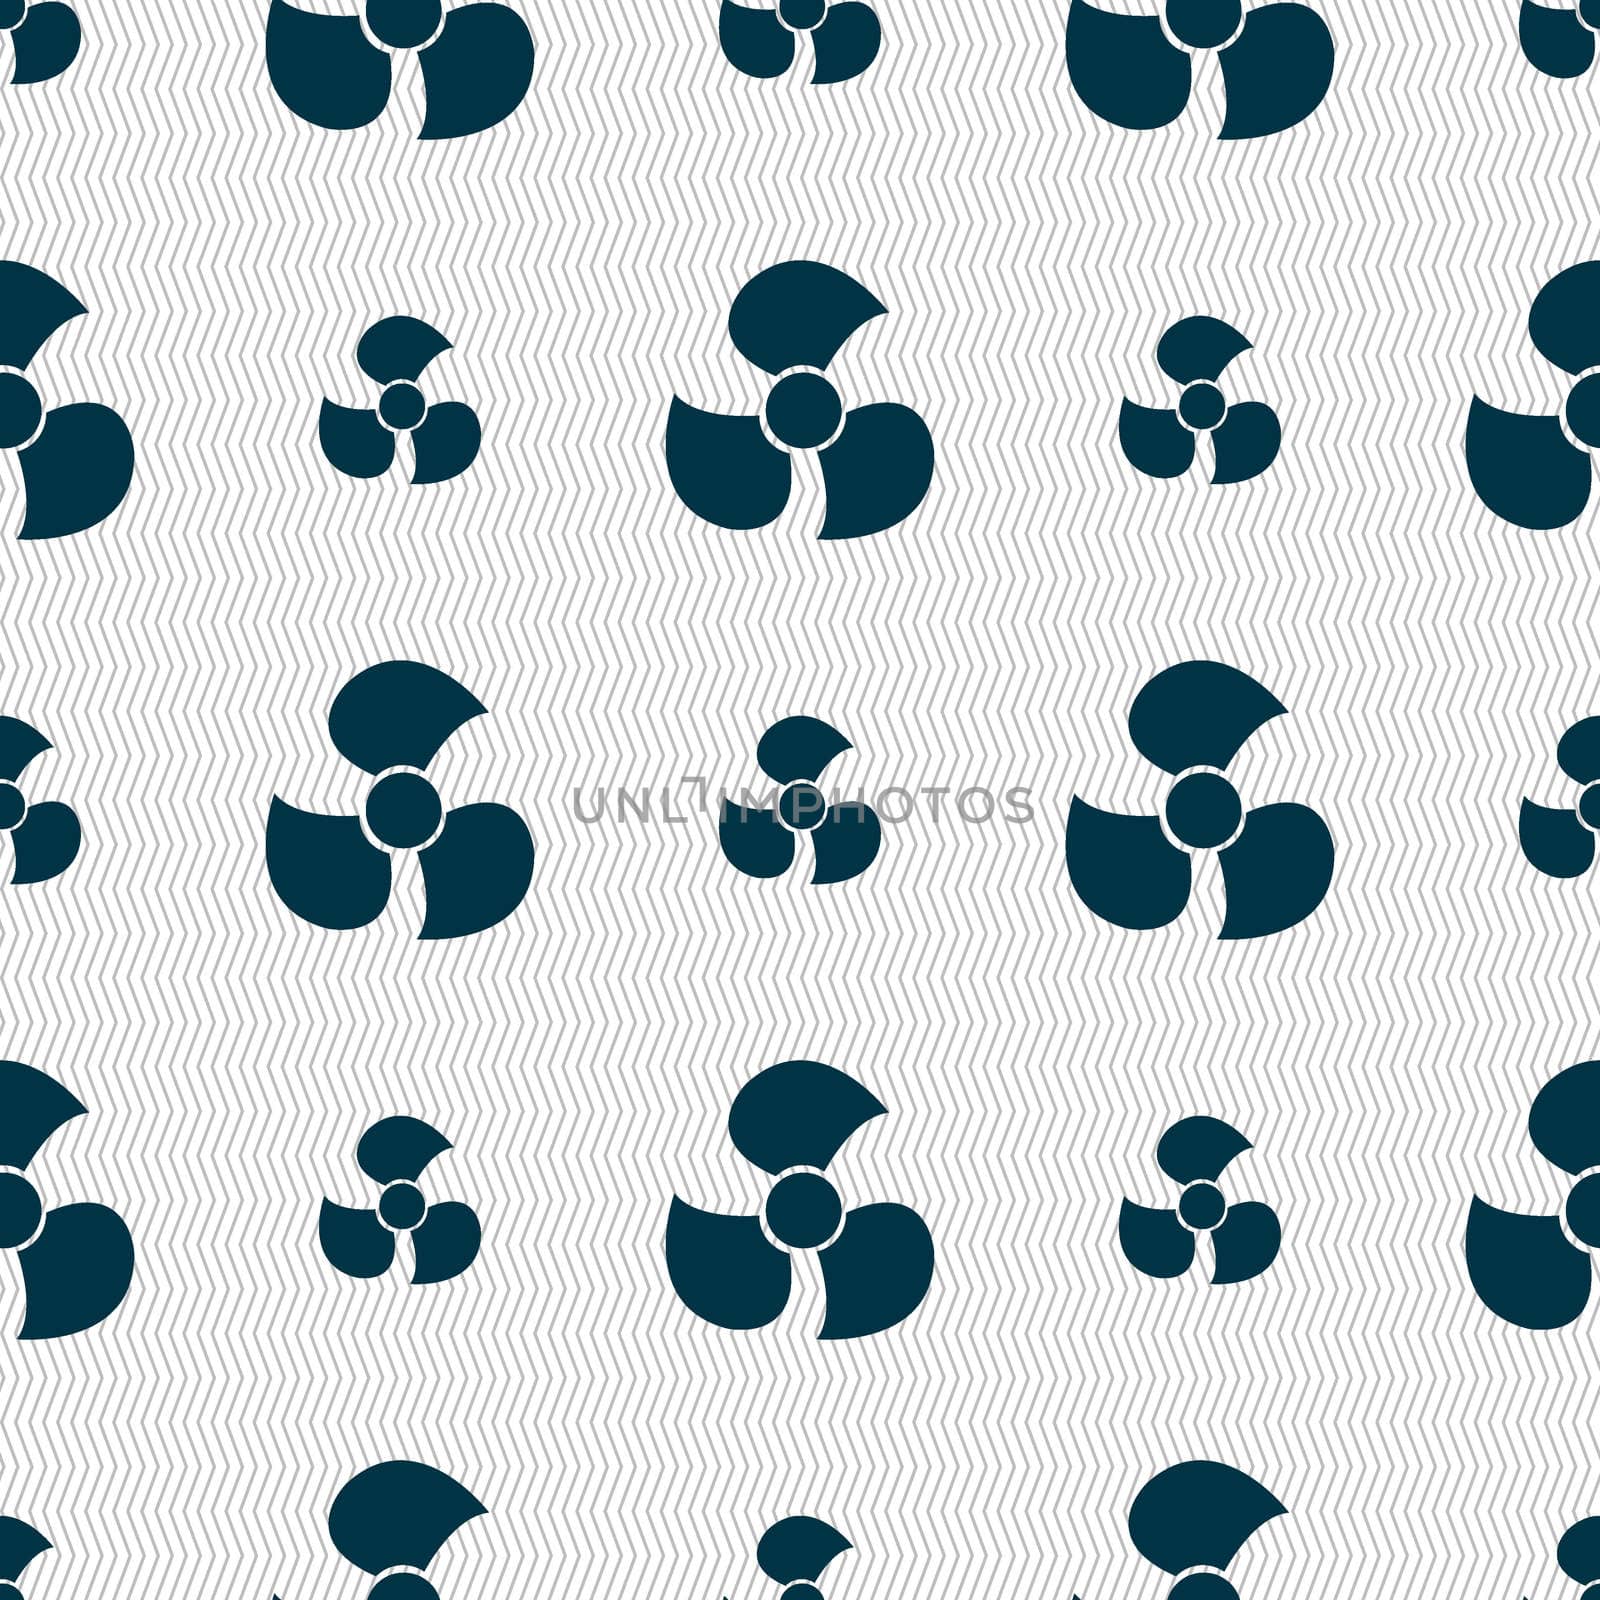 Fans, propeller icon sign. Seamless abstract background with geometric shapes. illustration